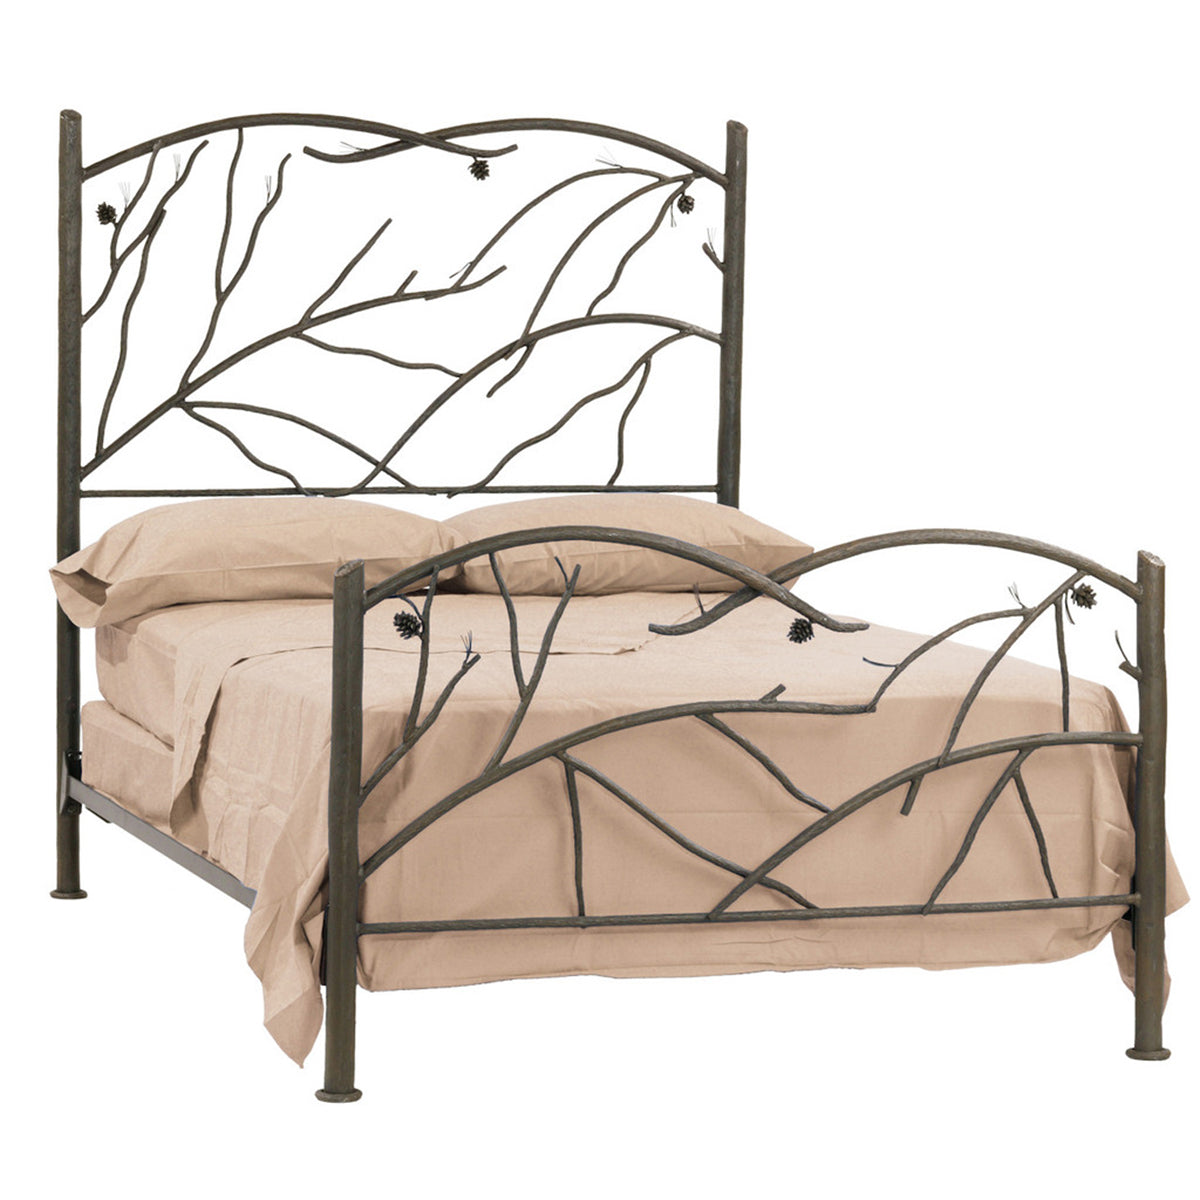 Pine Wrought Iron Bed